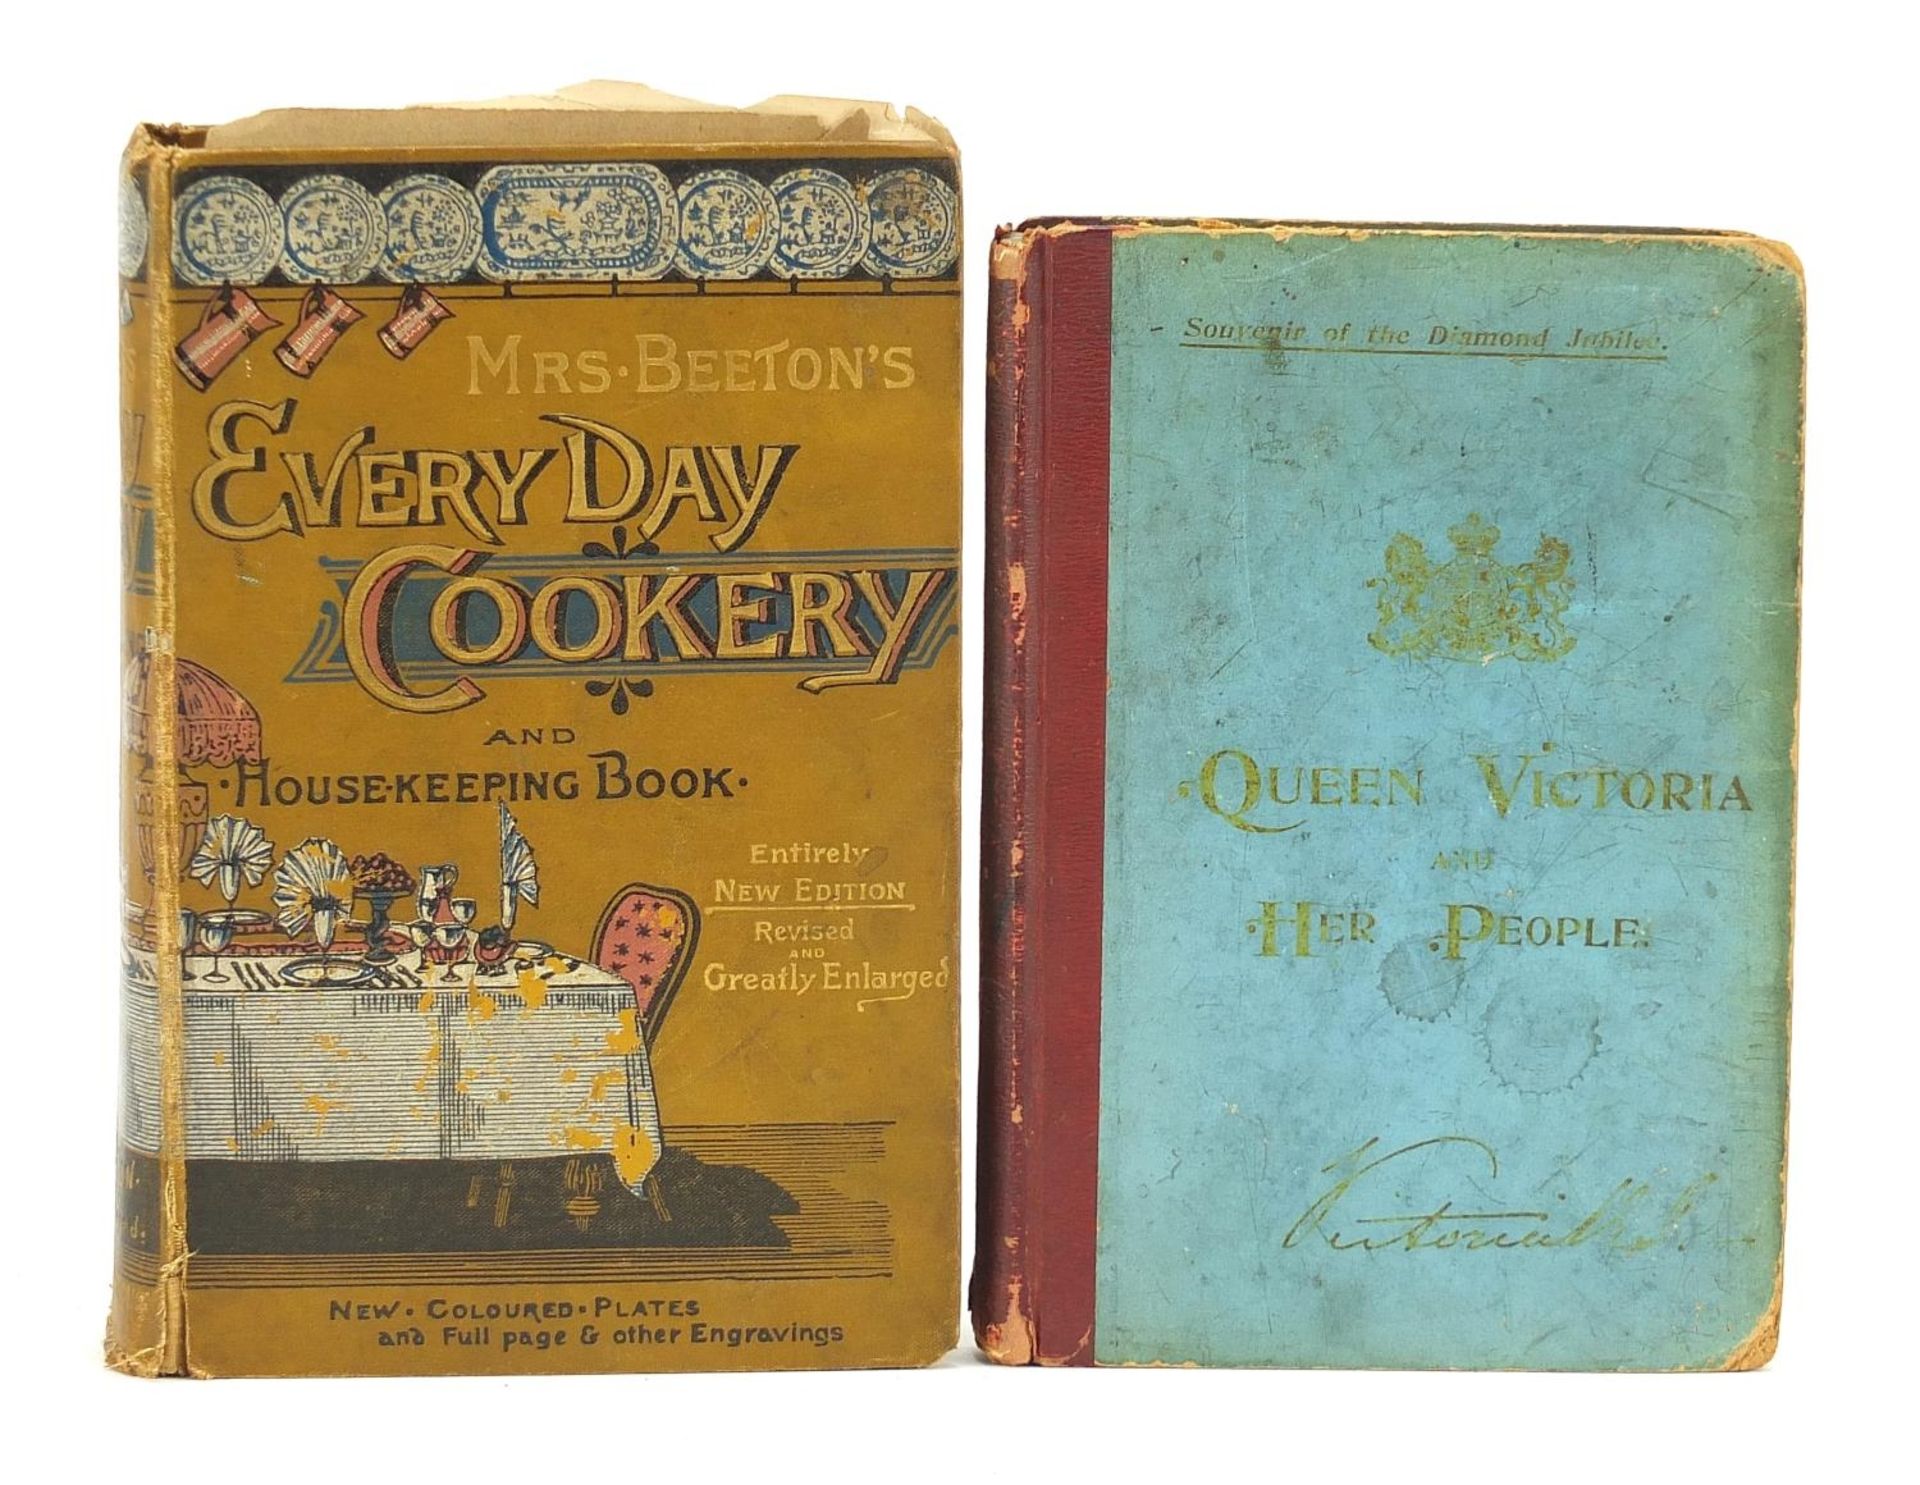 Two hardback books comprising Queen Victoria and her People and Mrs Beeton's Everyday Cooking and